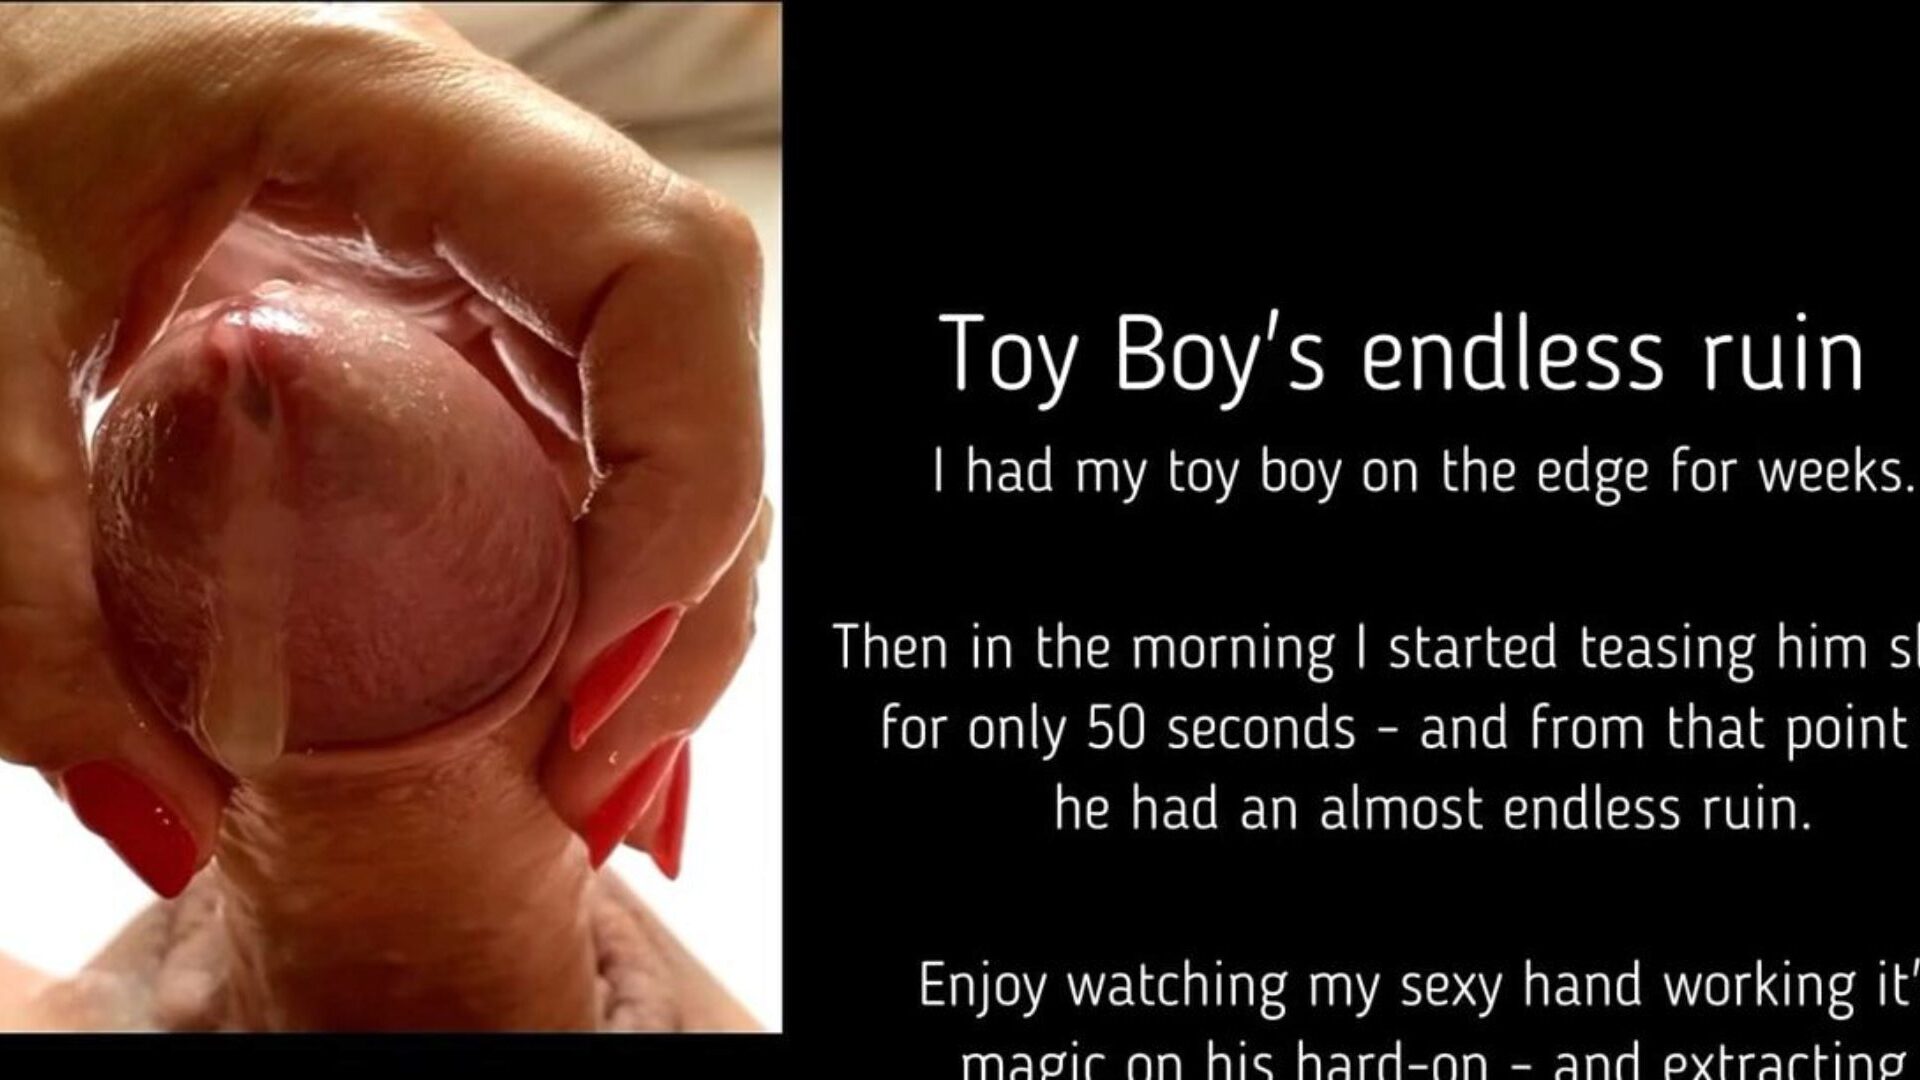 Toy Boy's never-ending demolish After teasing my toy boy for weeks - it took me only 50 seconds this morning to begin an mad jism cascade that lastet  forever  out of my fucktoy chap indeed having an agonorgasmos - I enjoy it!